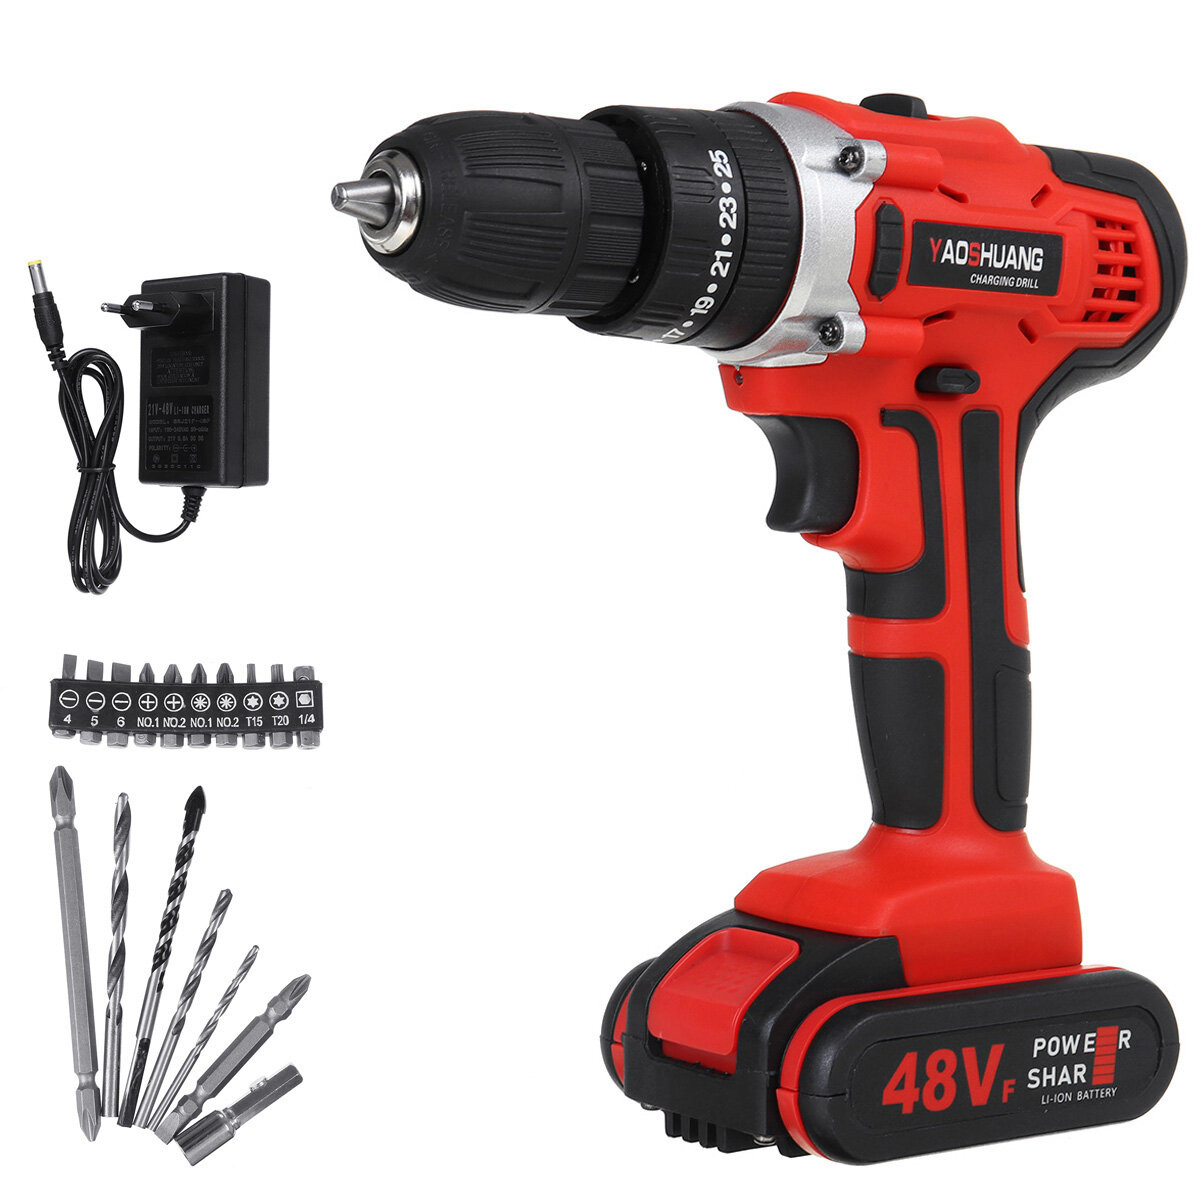 

48VF Electric Torque Impact Drill Cordless Hammer Screwdriver 25+3 35NM-56NM Tool W/ 1pc Battery